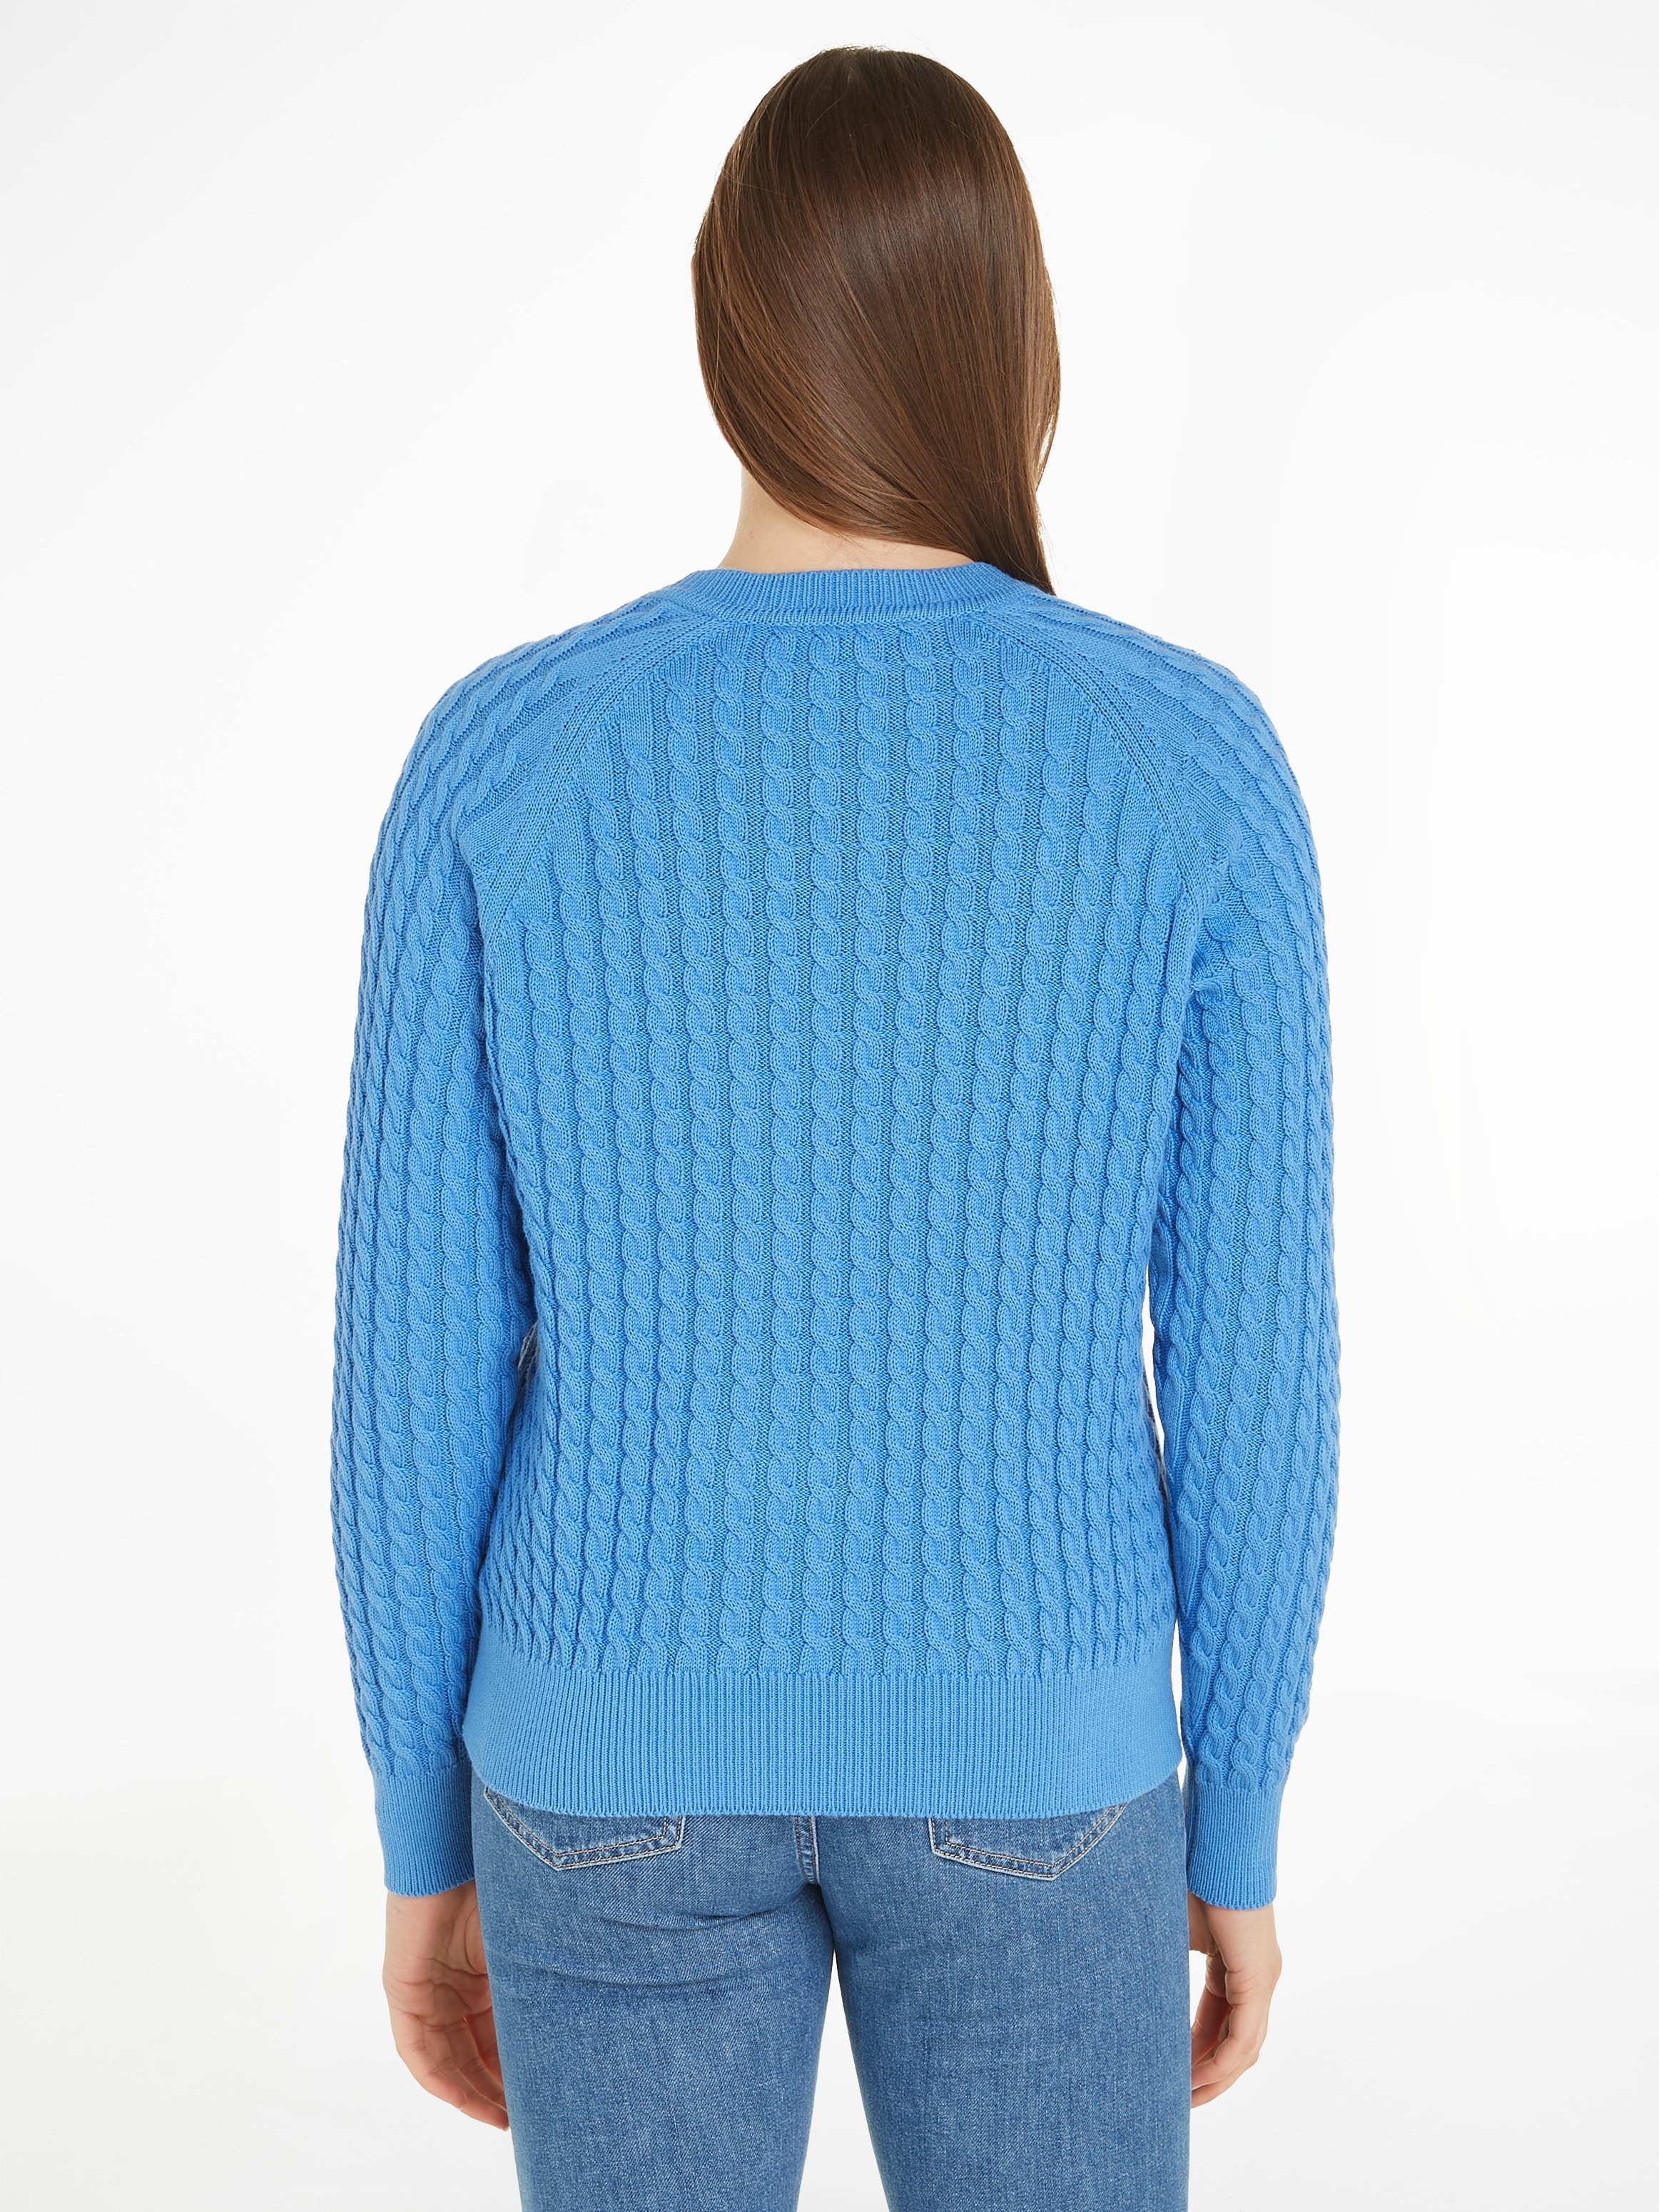 Tommy Hilfiger Rundhalspullover »CO CABLE C-NK SWEATER«, mit Zopfmuster